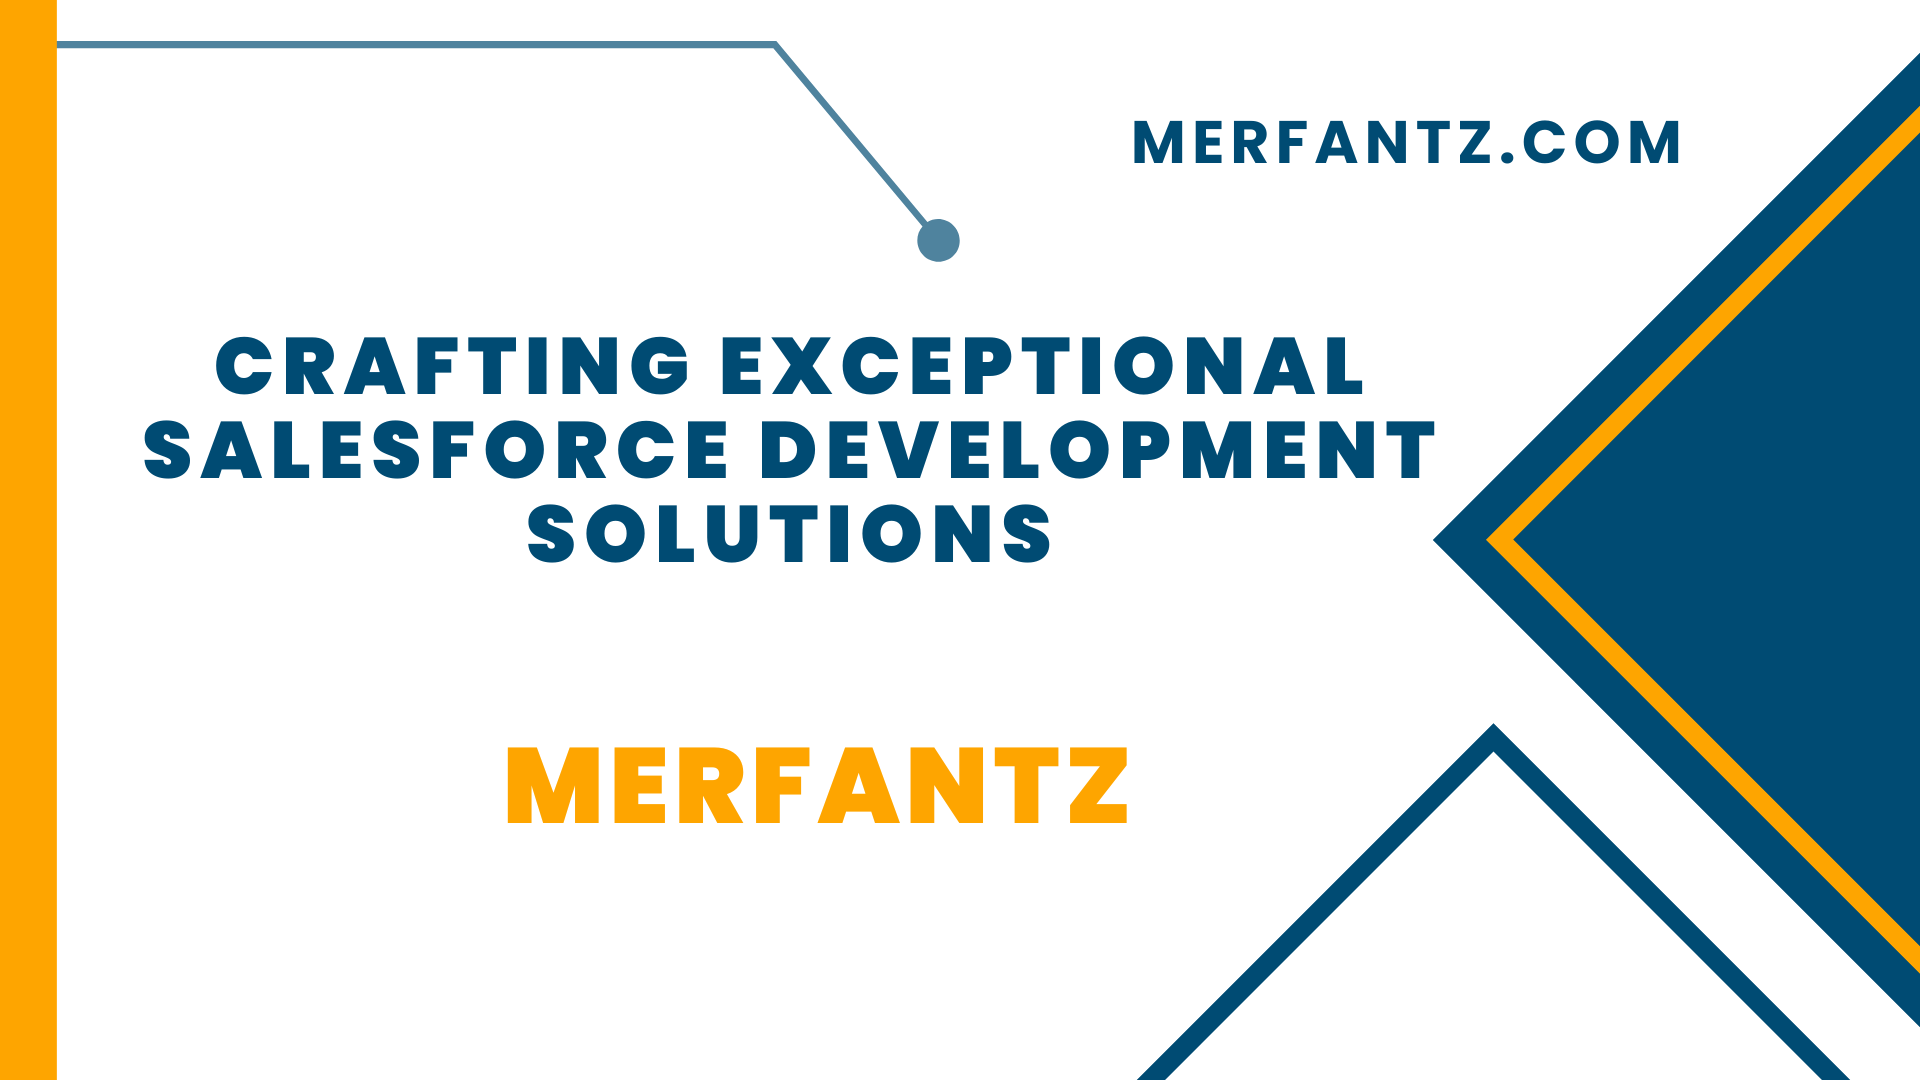 Crafting Exceptional Salesforce Development Solutions